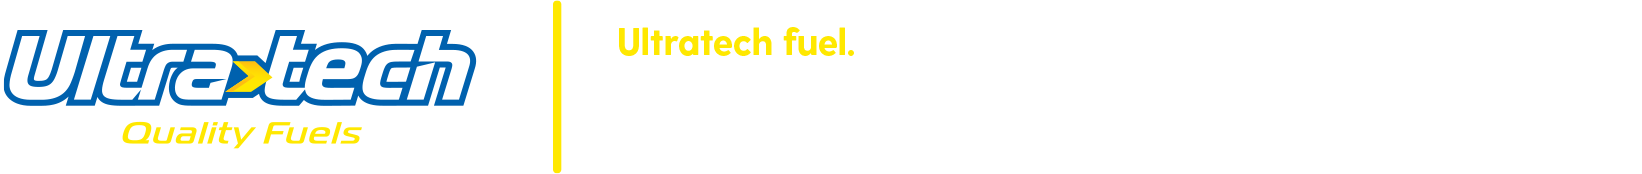 Ultratech fuel. Proven to make your engine run cleaner, longer and more efficiently. Only at Sunoco